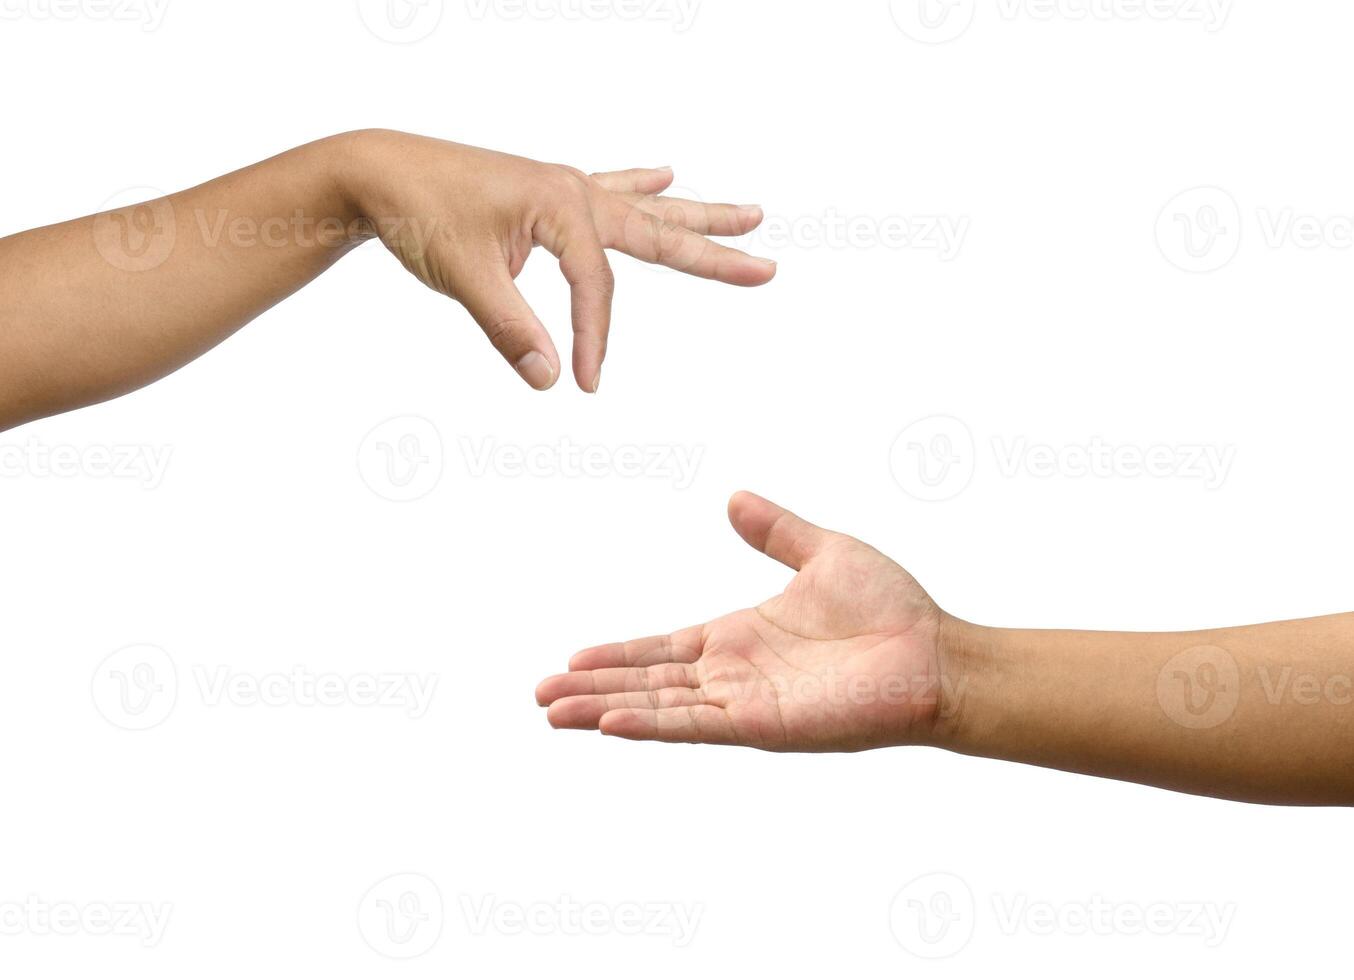 Hand gestures by two people. Expresses support for an opportunity to commensurate with others photo